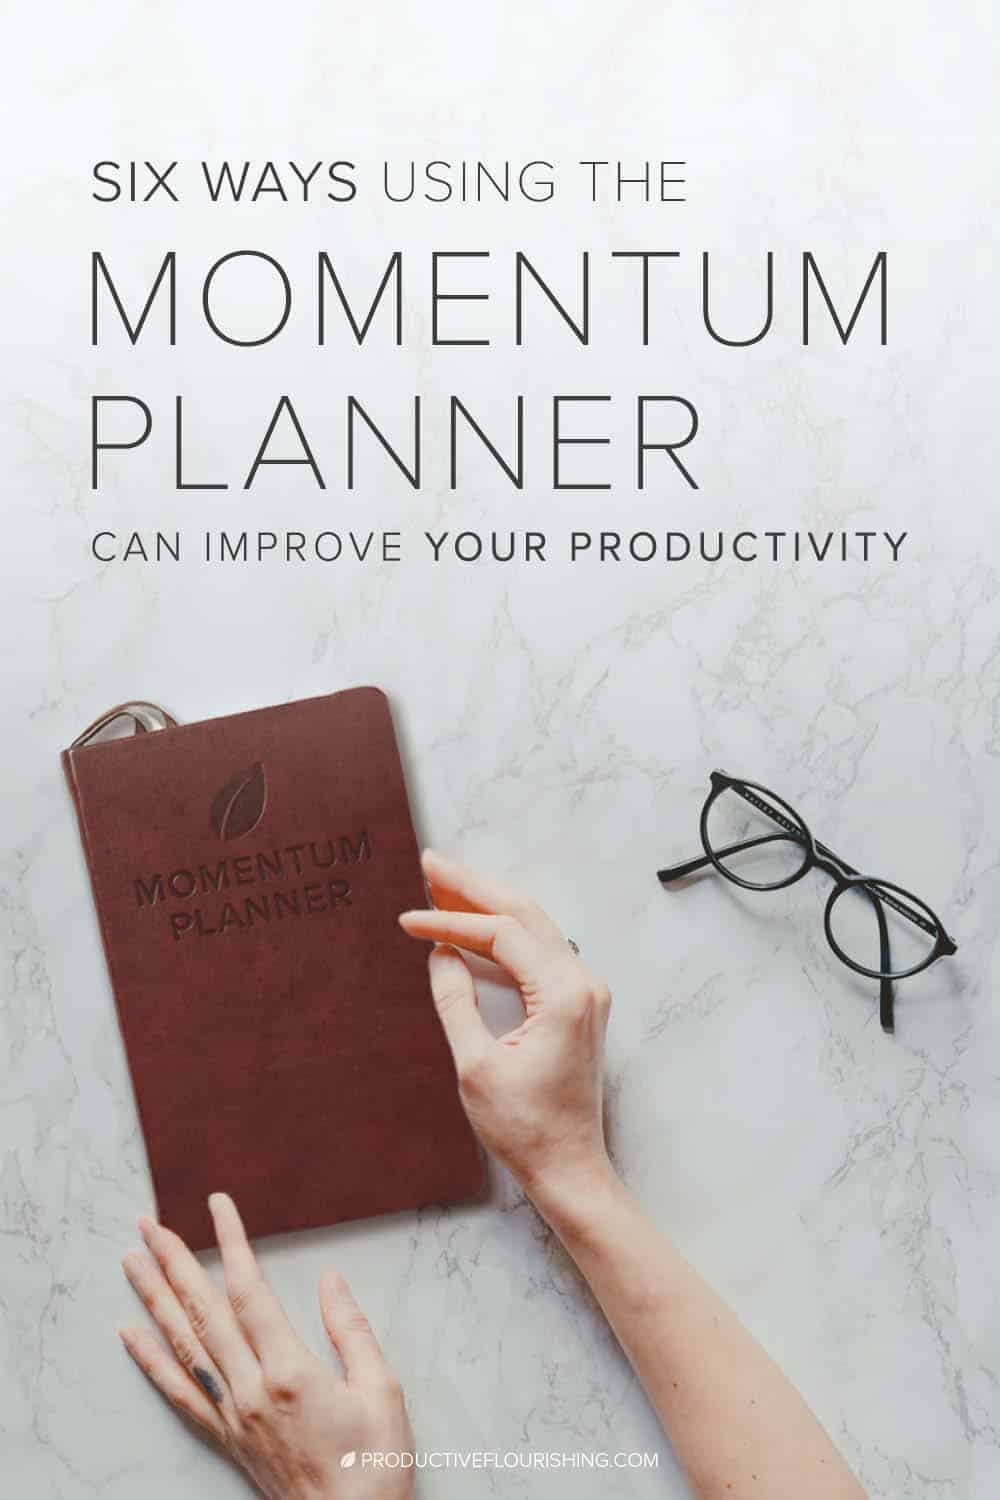 Find out the 6 ways our Planner can improve your small business productivity. Do you think a hardback planner is better than a digital planner? See what we think. #entrepreneurproductivity #smallbusiness #productiveflourishing